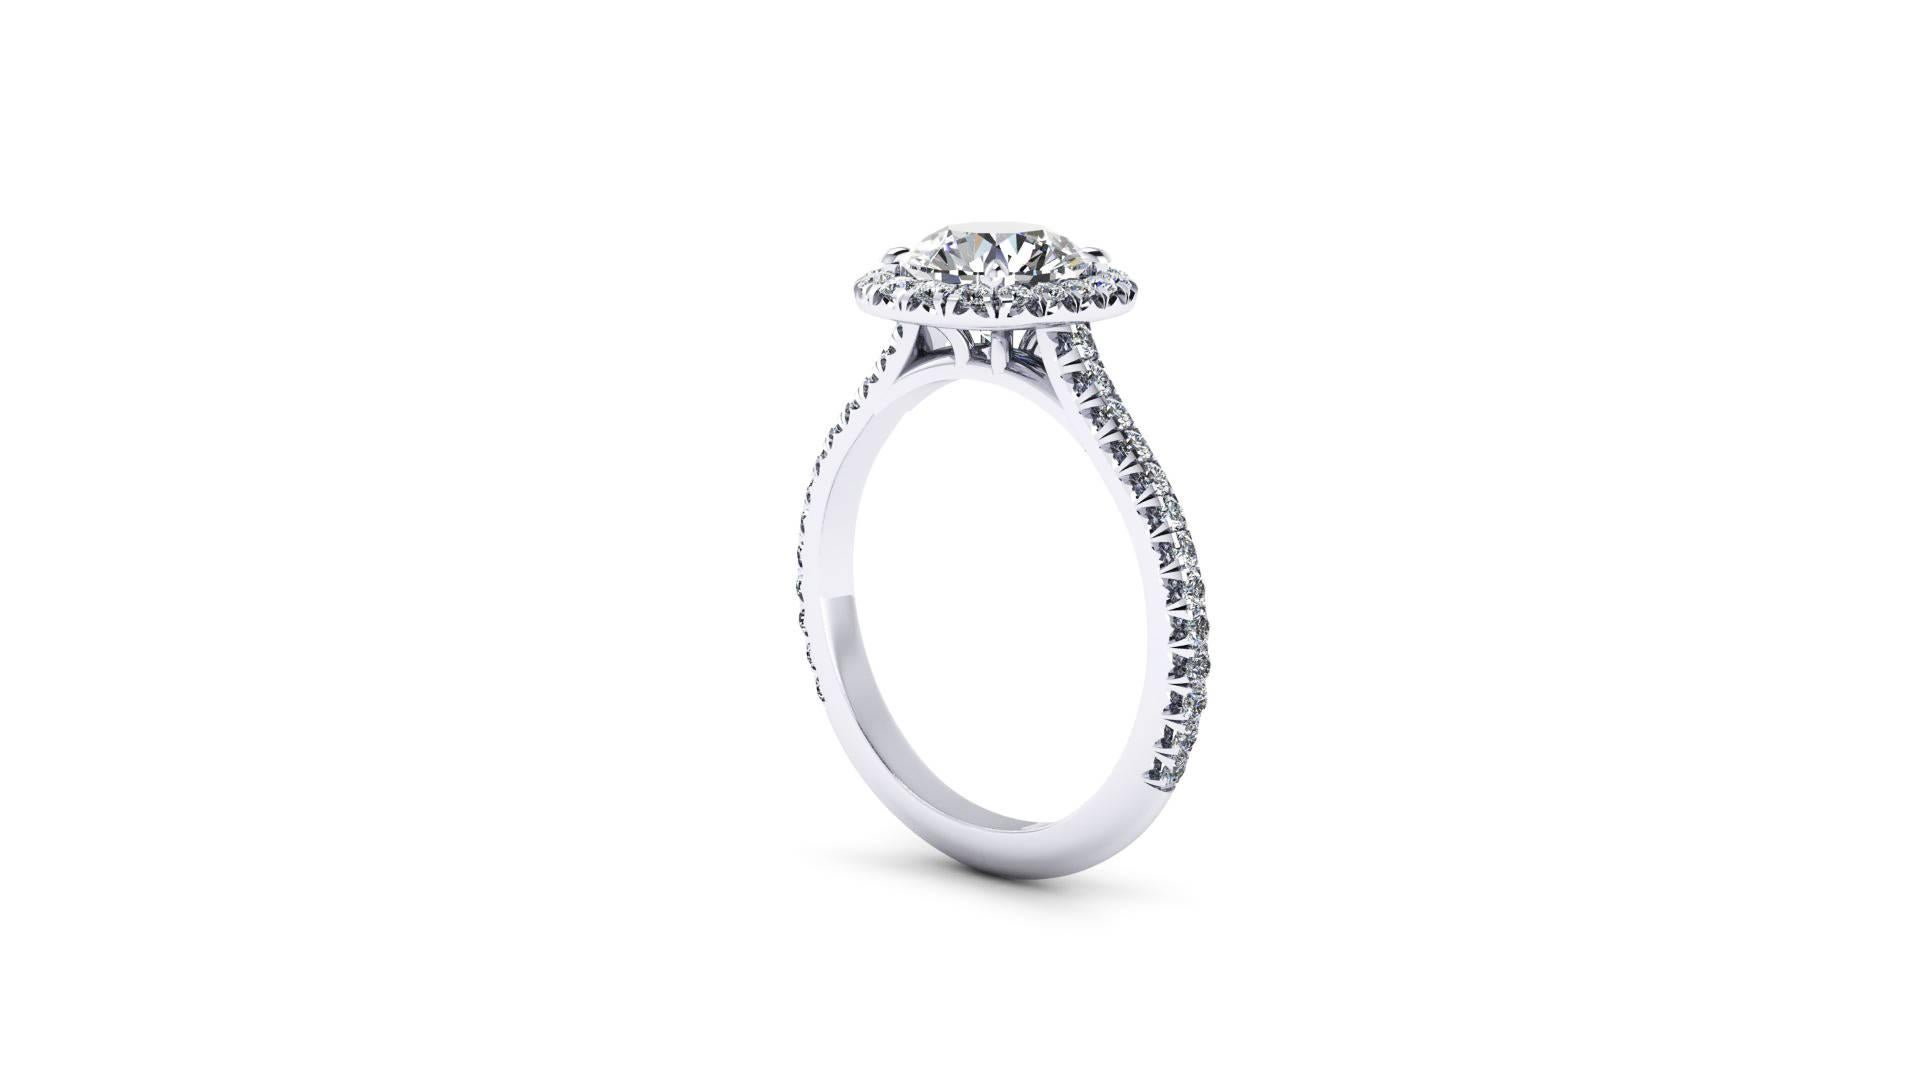 GIA Certified 1.25 Carat Round Diamond H color VVS2 clarity, triple excellent
set in a Diamond Halo ring with diamonds on shank for a total diamond weight of 0.50 carats, Low Setting Style, pret-a-porter, easy to wear, hand made in Platinum in New